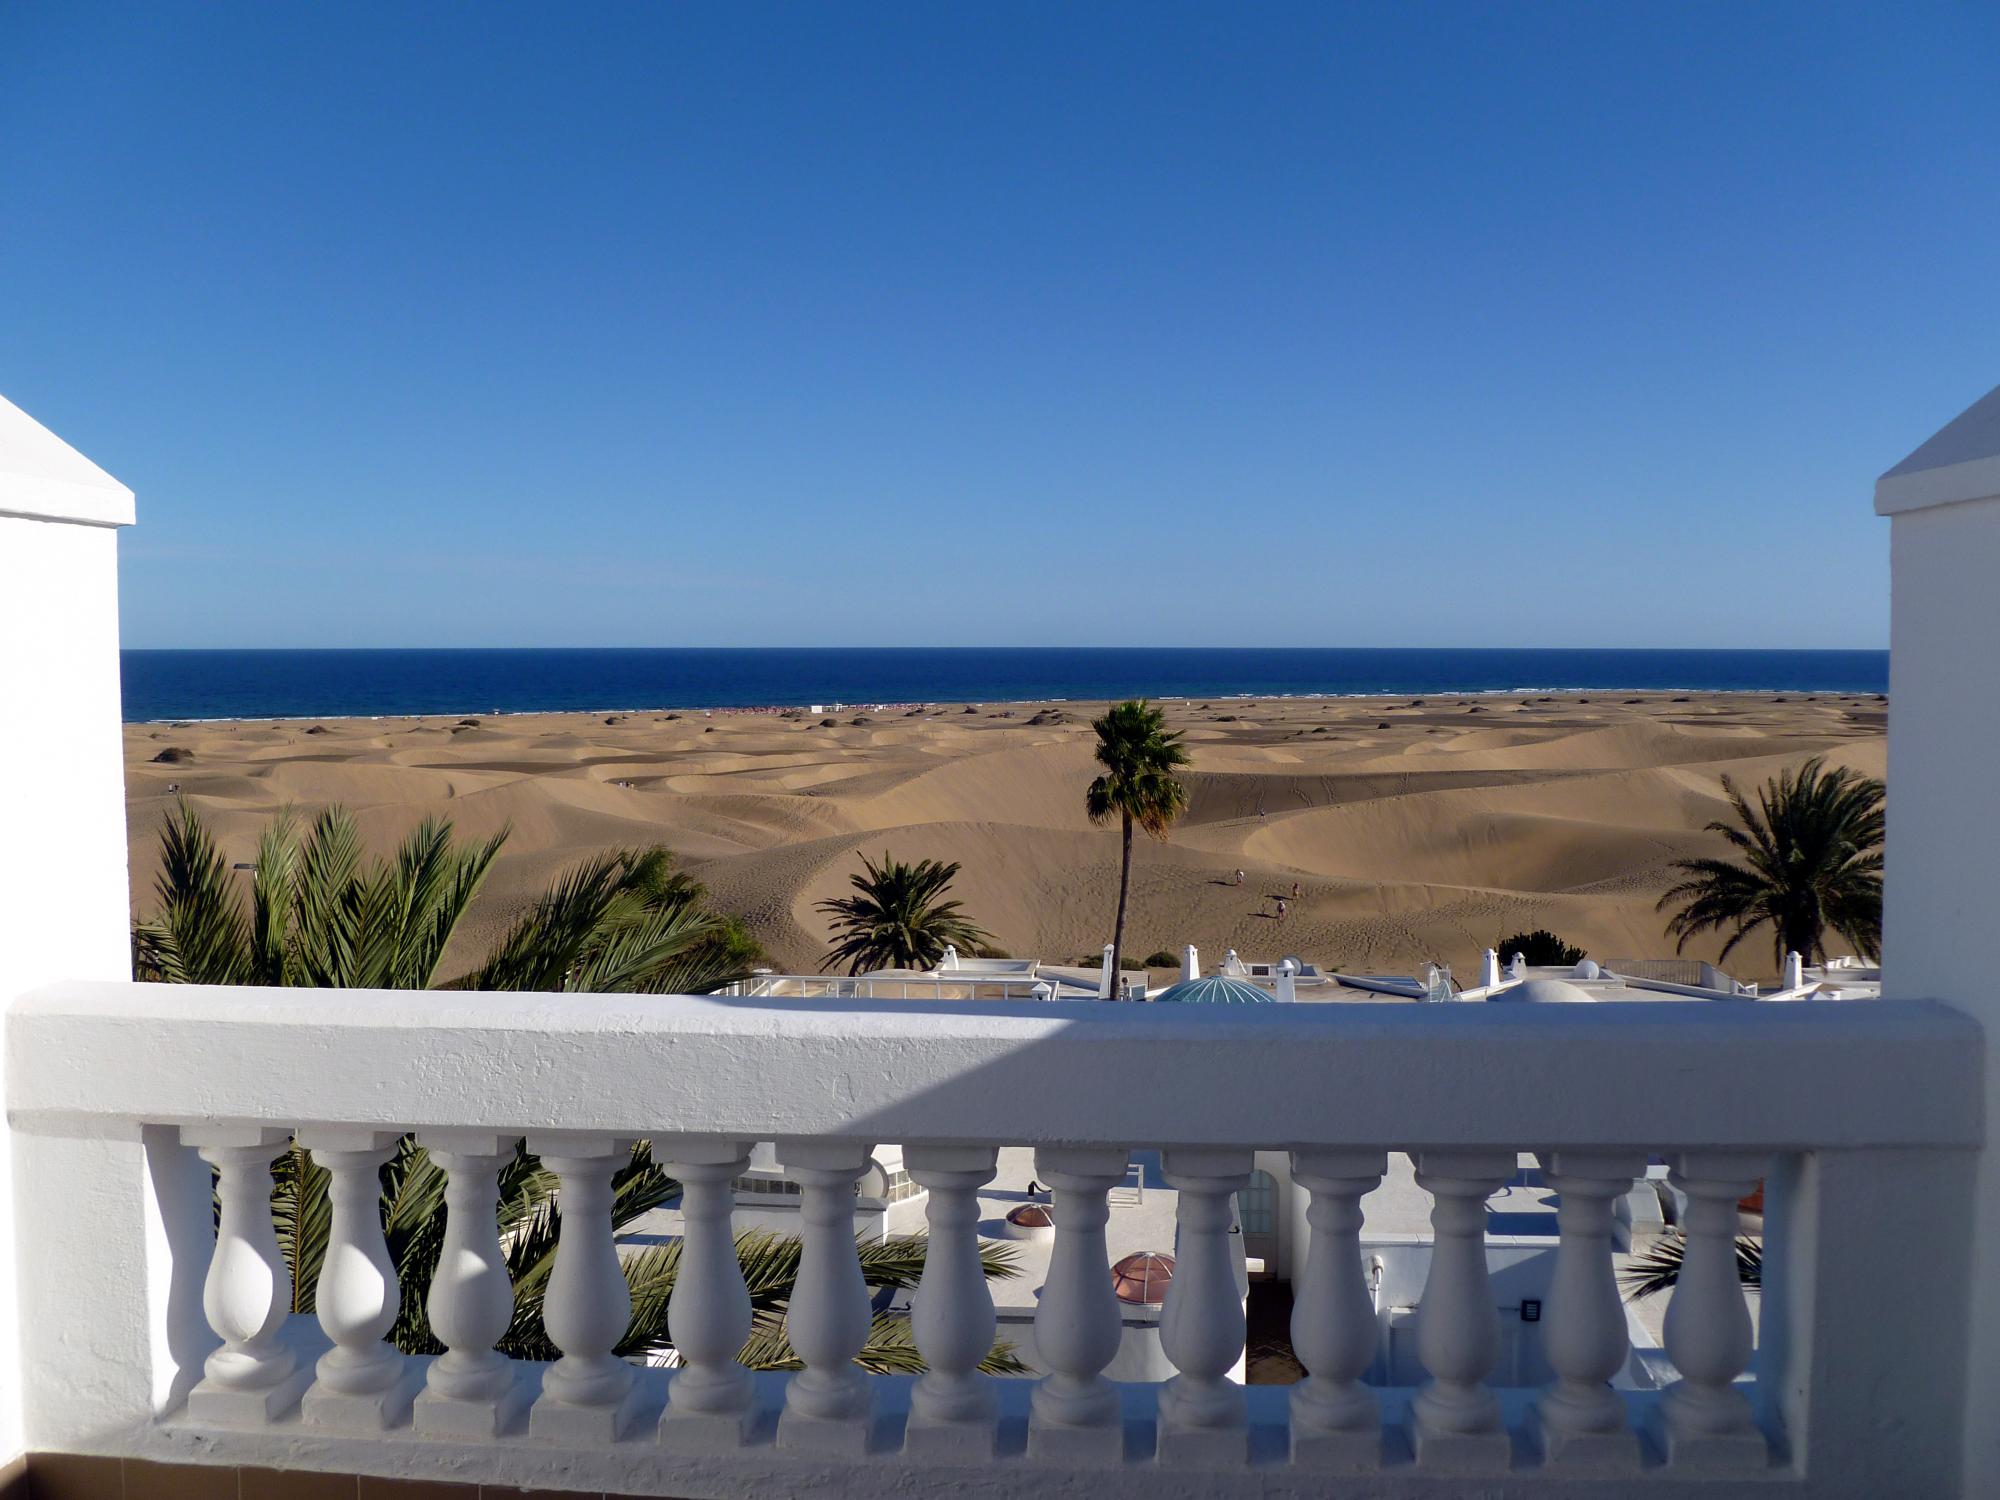  Canary Islands - Room View